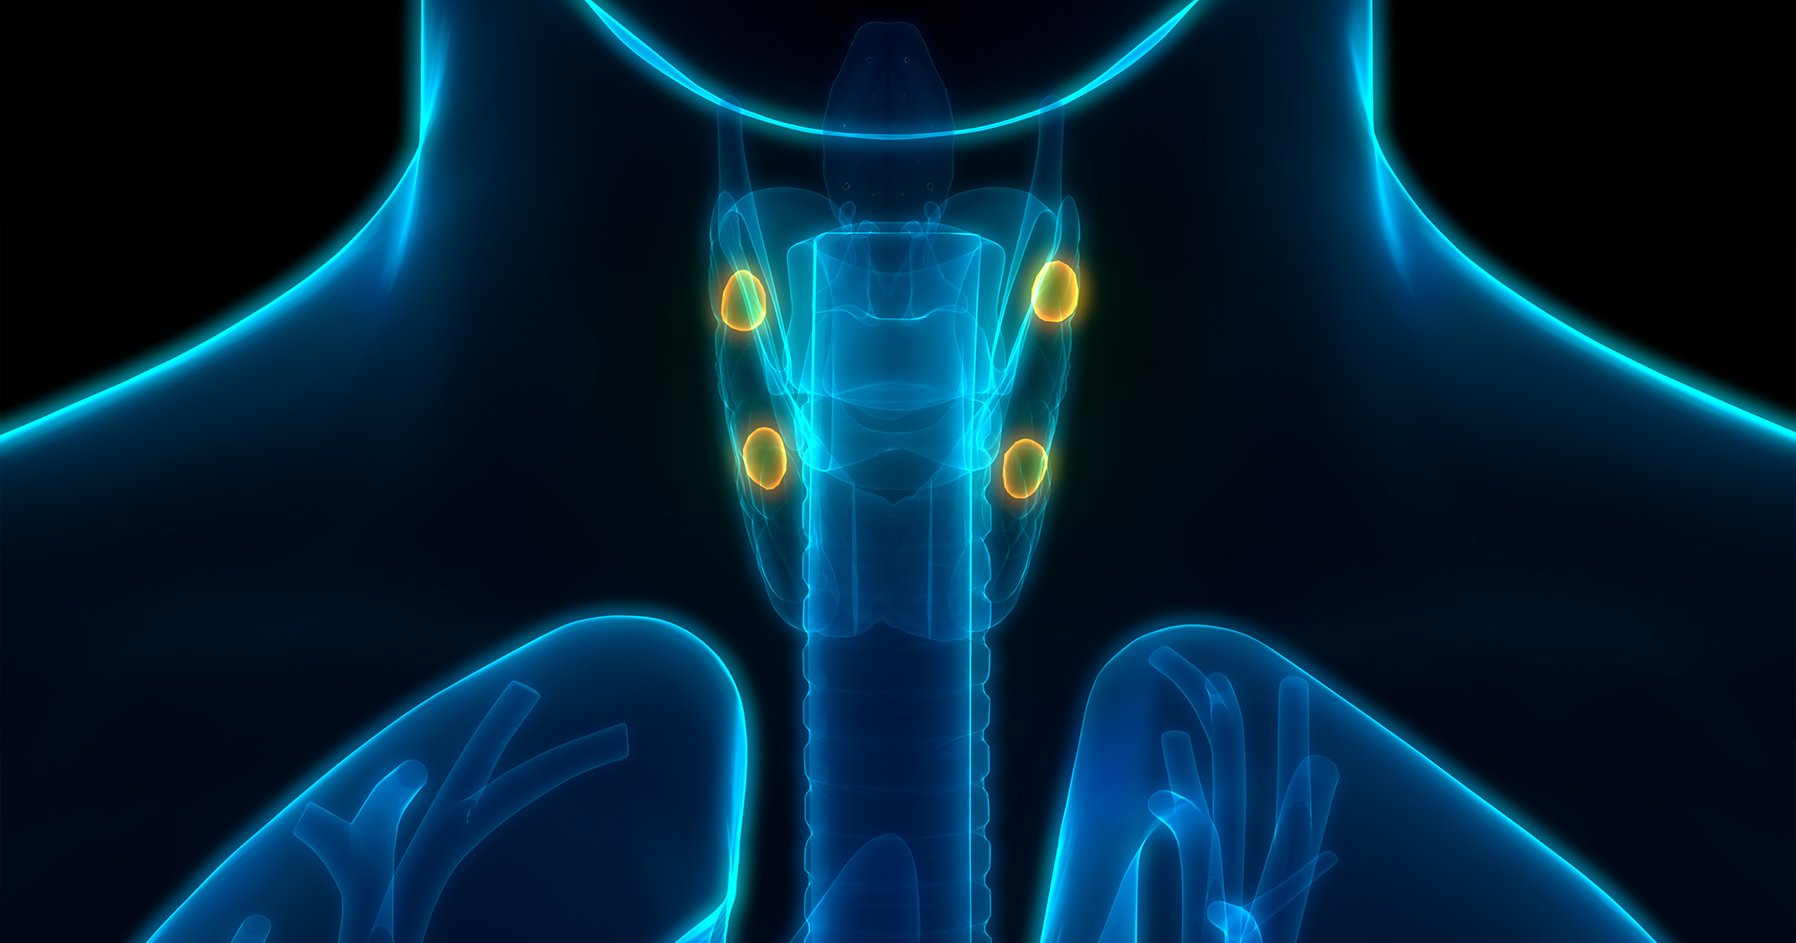 Image of glands responsible for primary hyperparathyroidism.